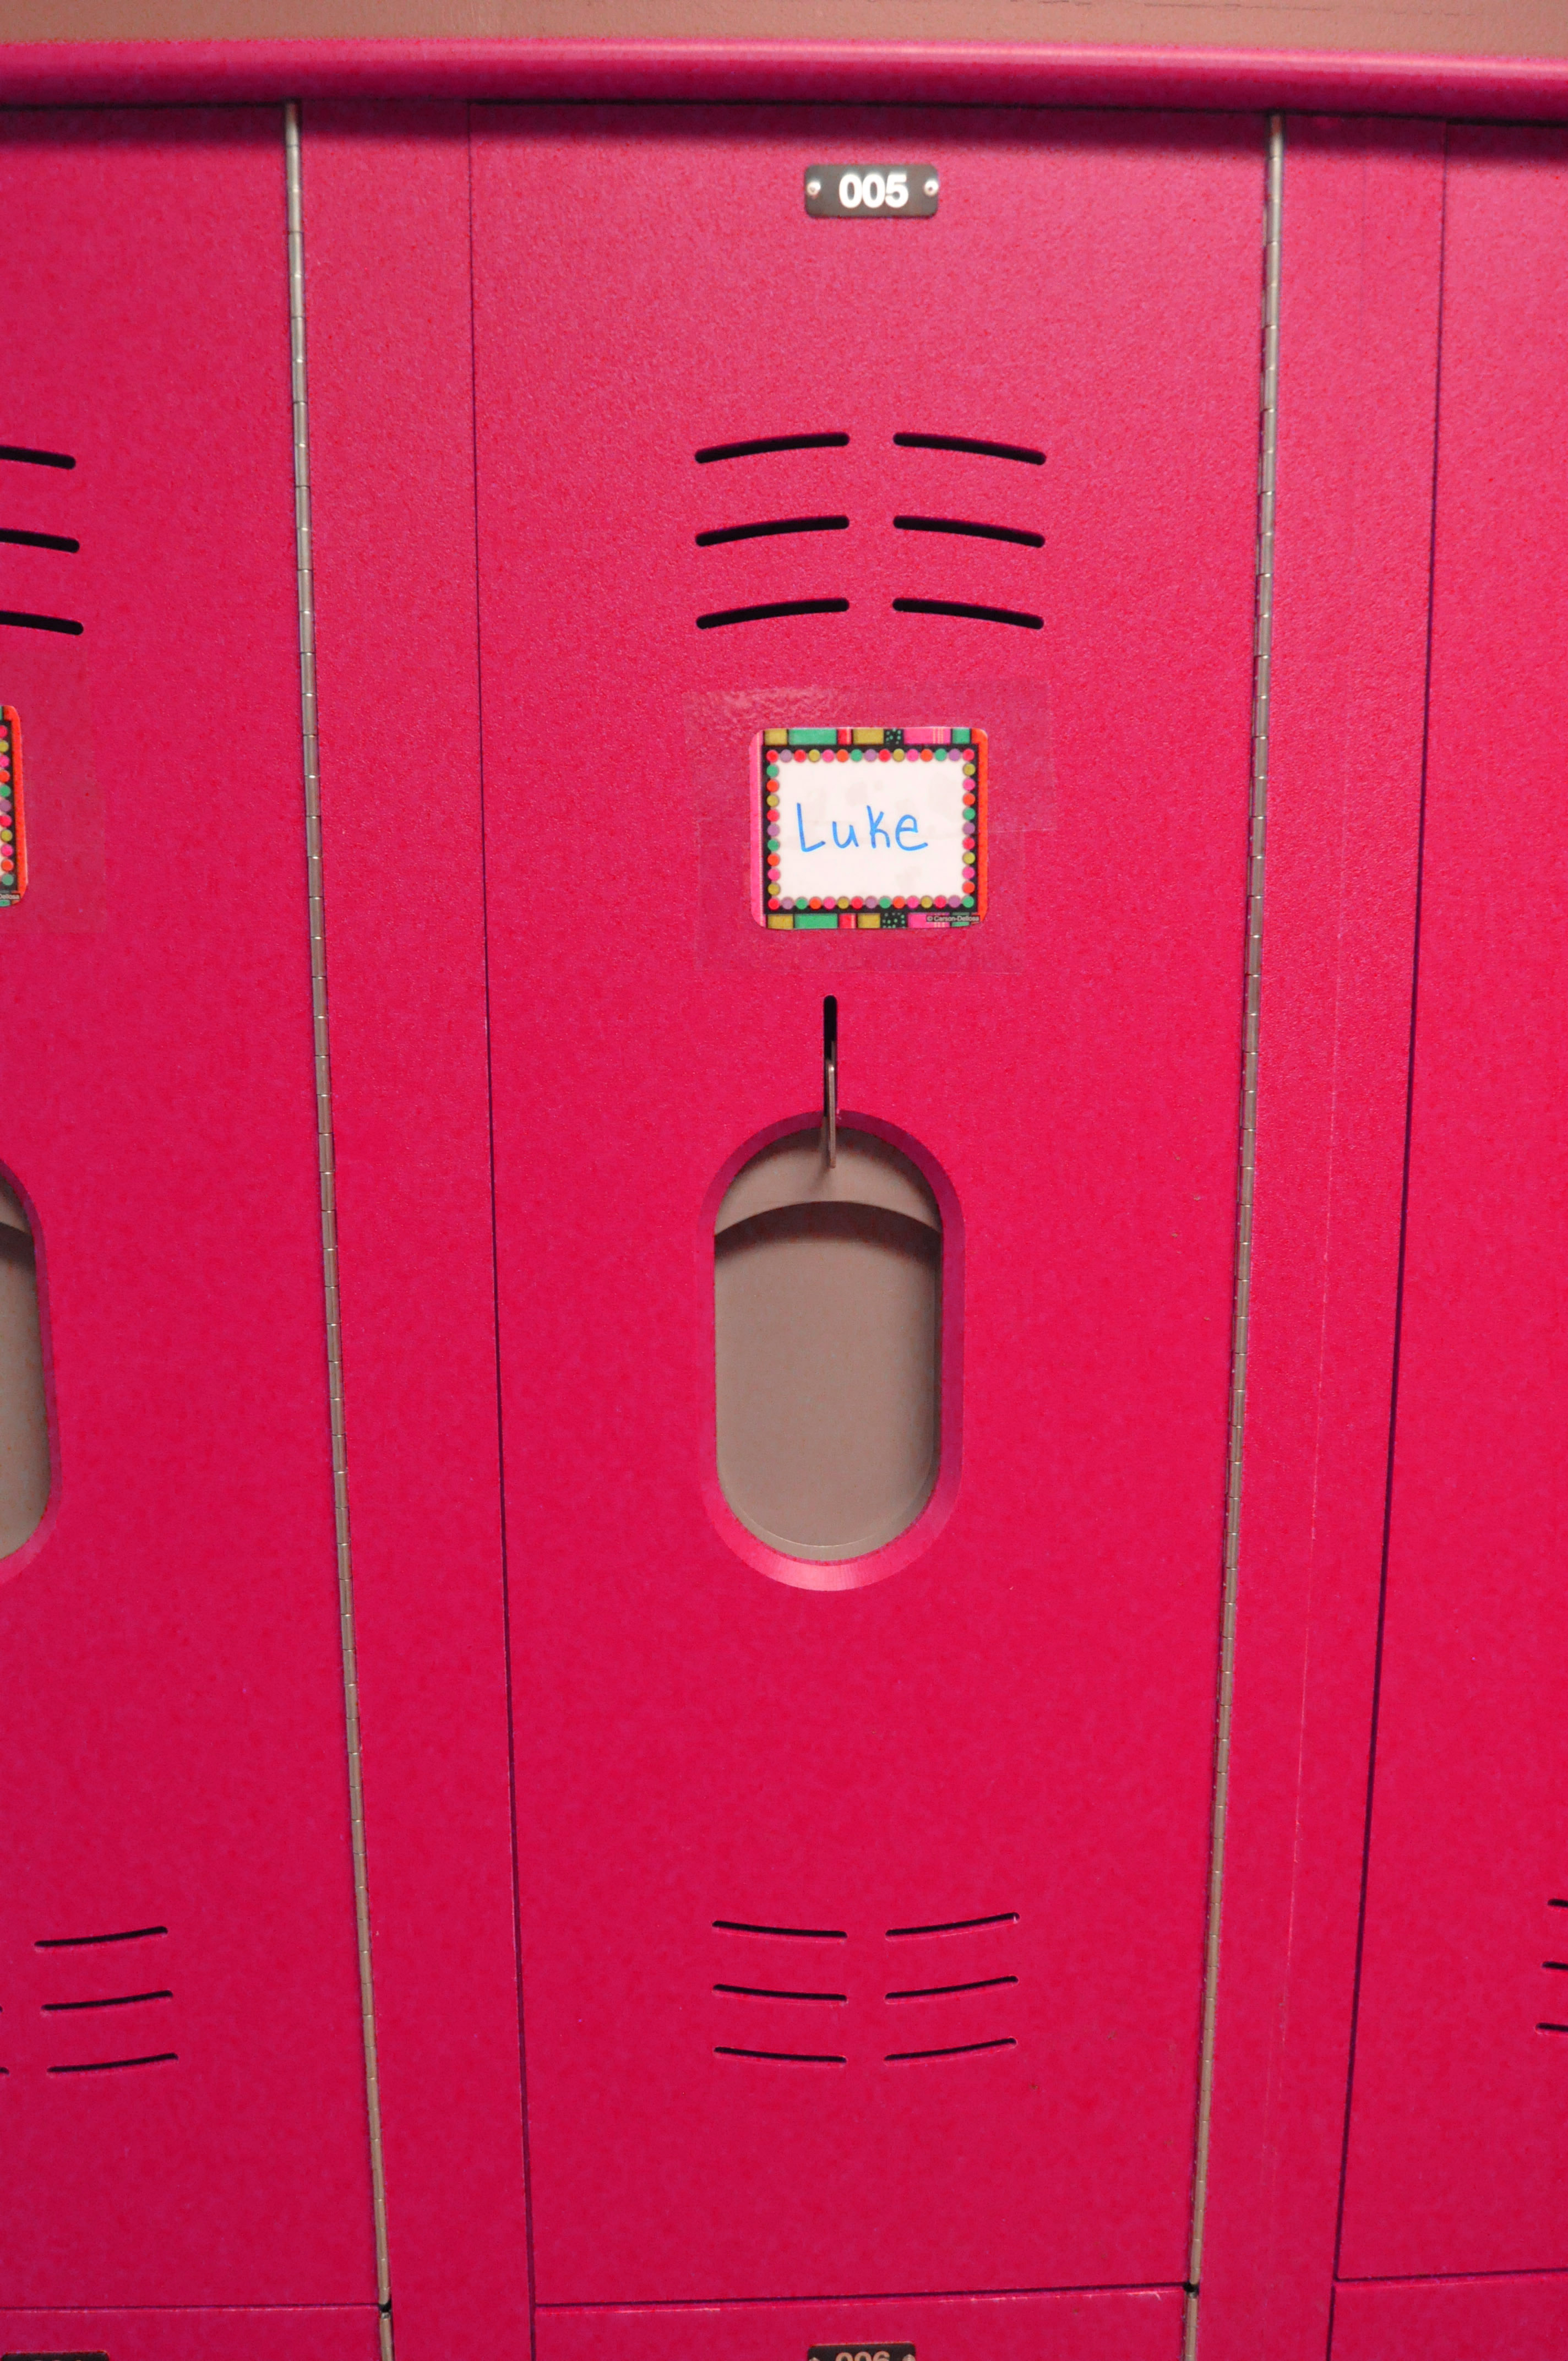 Having high quality lockers teaches responsibility and pride to St. Ann's kindergarten students